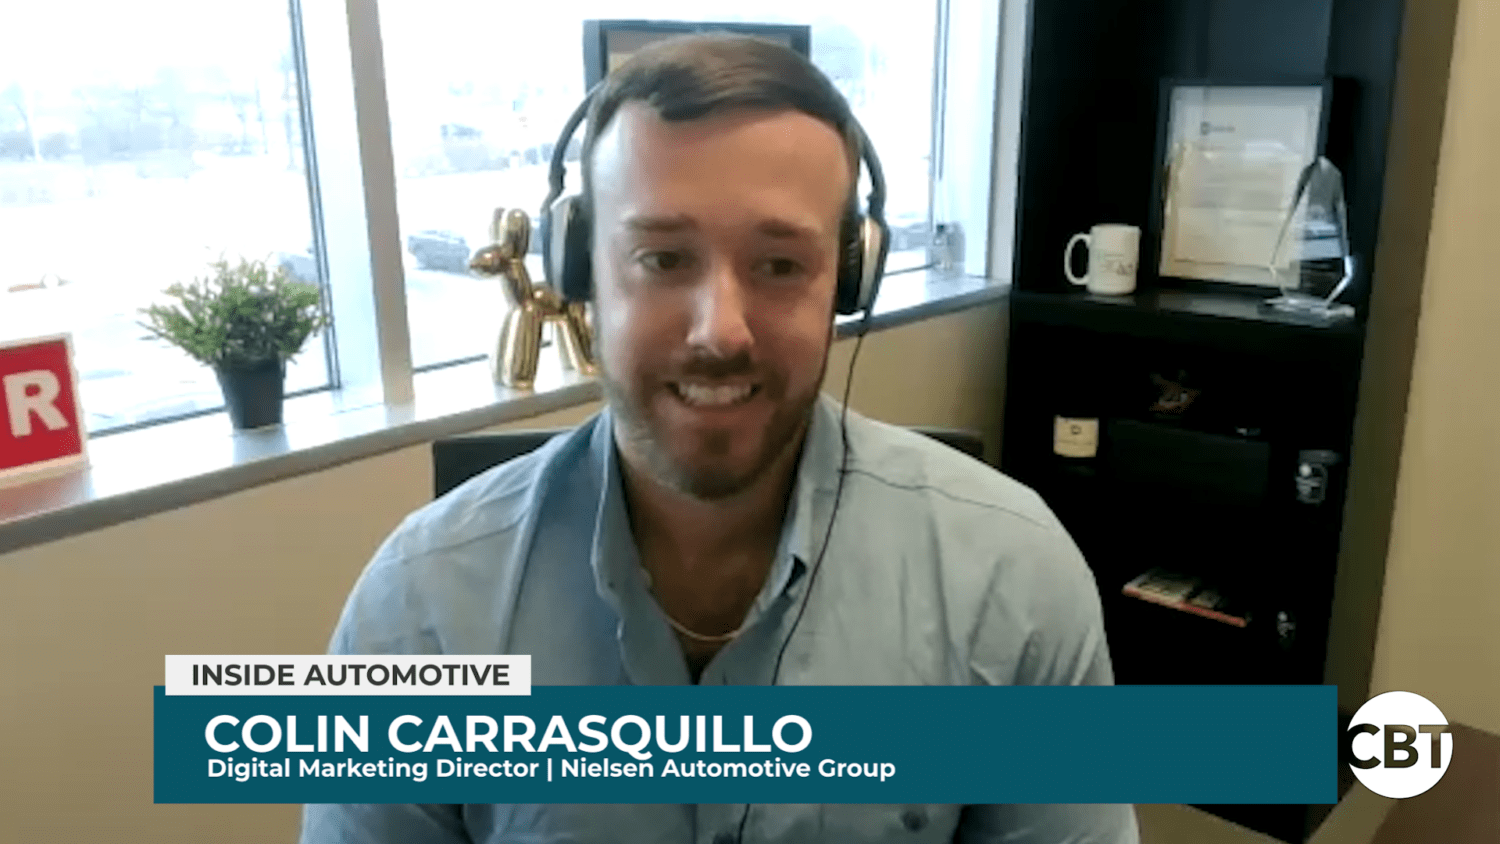 Colin Carrasquillo joins Inside Automotive to share how dealers can use first party data to super-charge their digital marketing strategies.